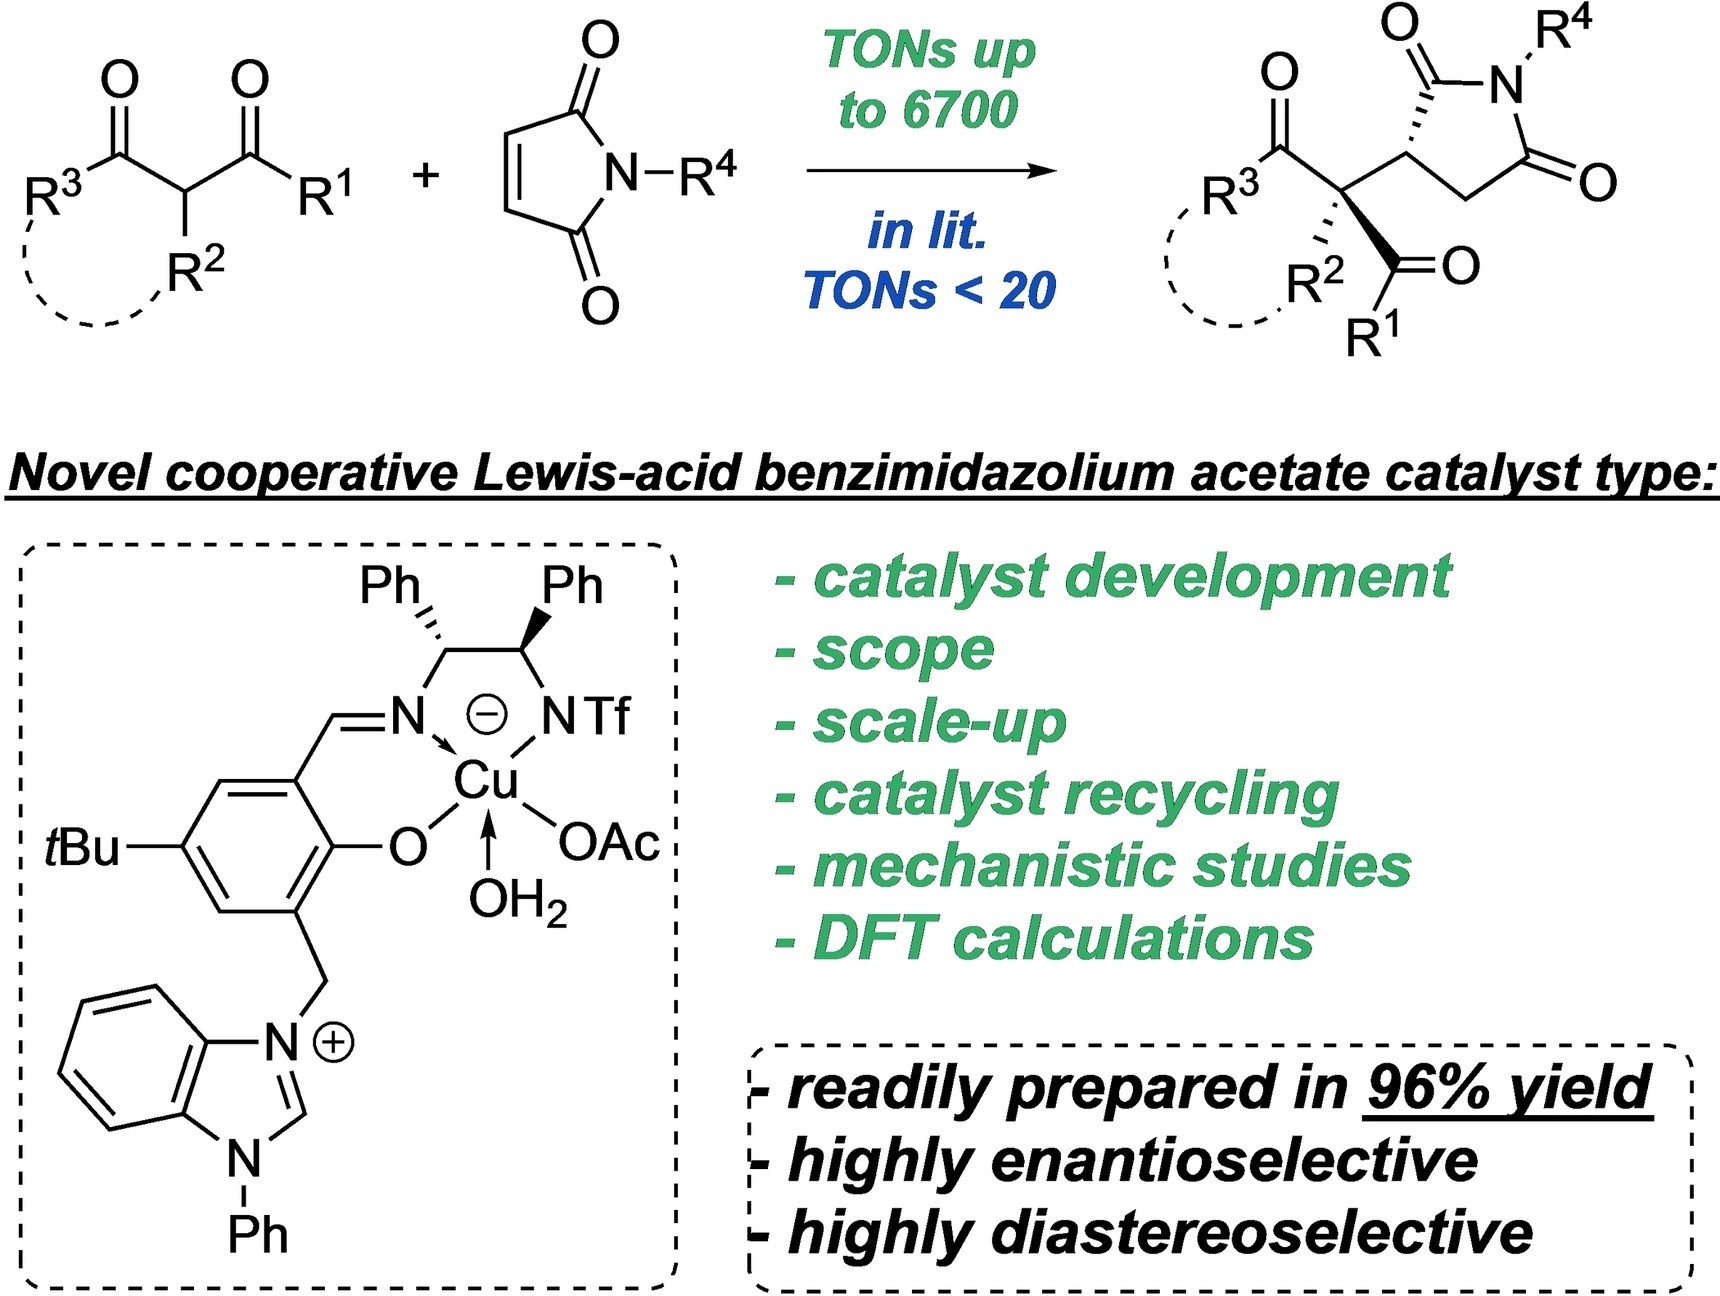 A Practical and Robust Zwitterionic Cooperative Lewis Acid/Acetate/Benzimidazolium Catalyst for Direct 1,4-Additions